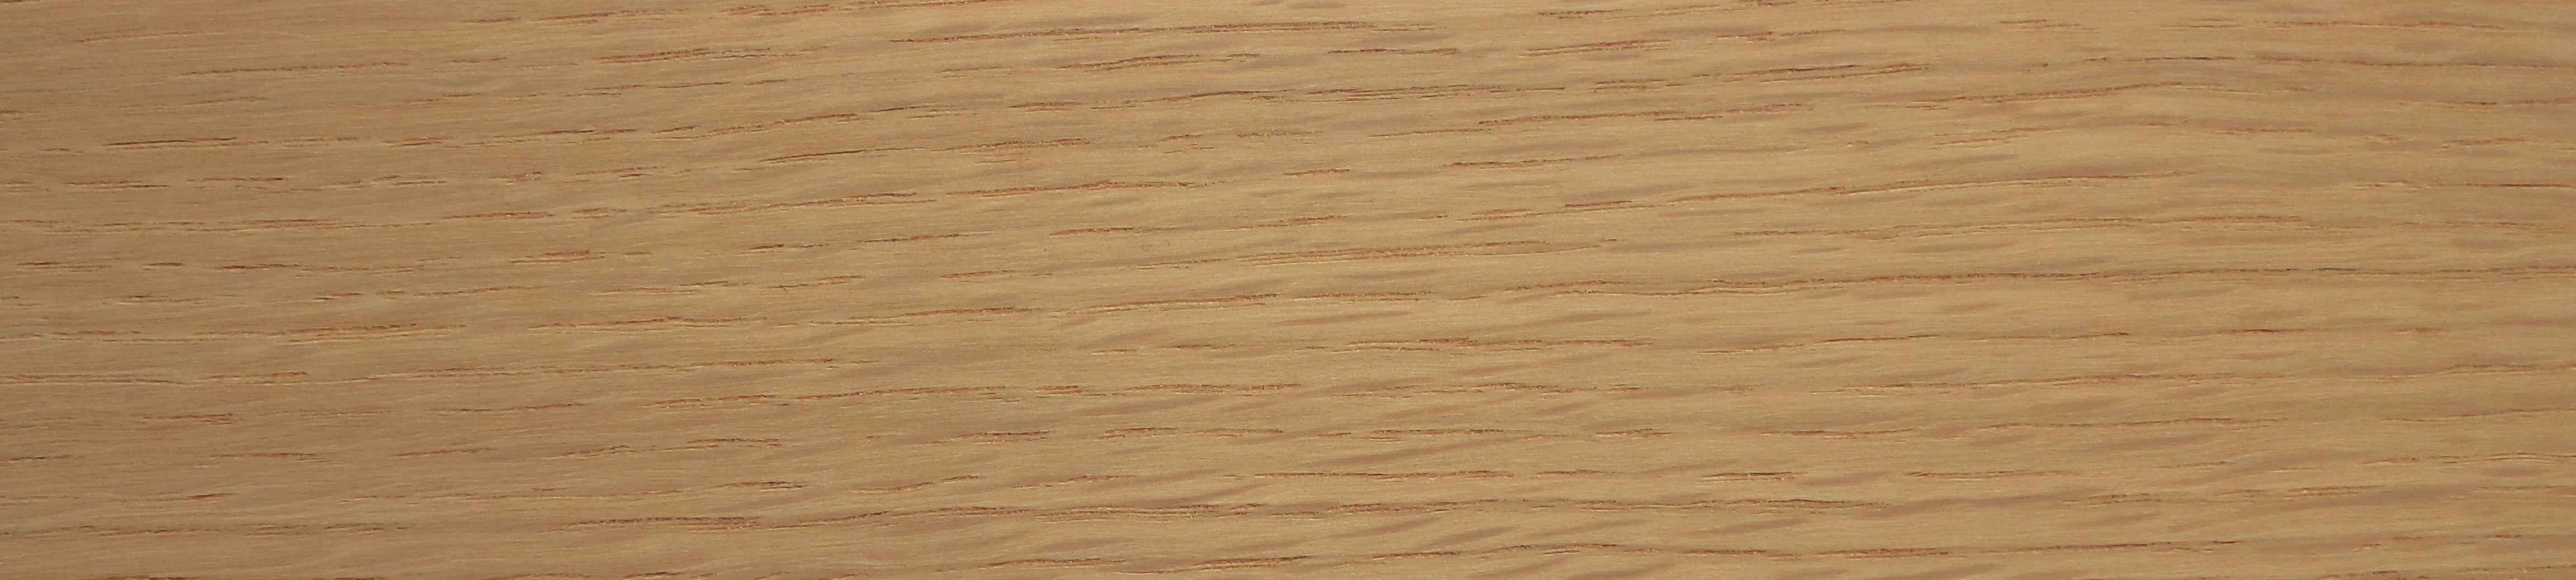 American White Oak Thick wood Pre-glued Edging / Lipping 22mm x 1mm x 50 Metres - EDGEBANDER OR IRON ON